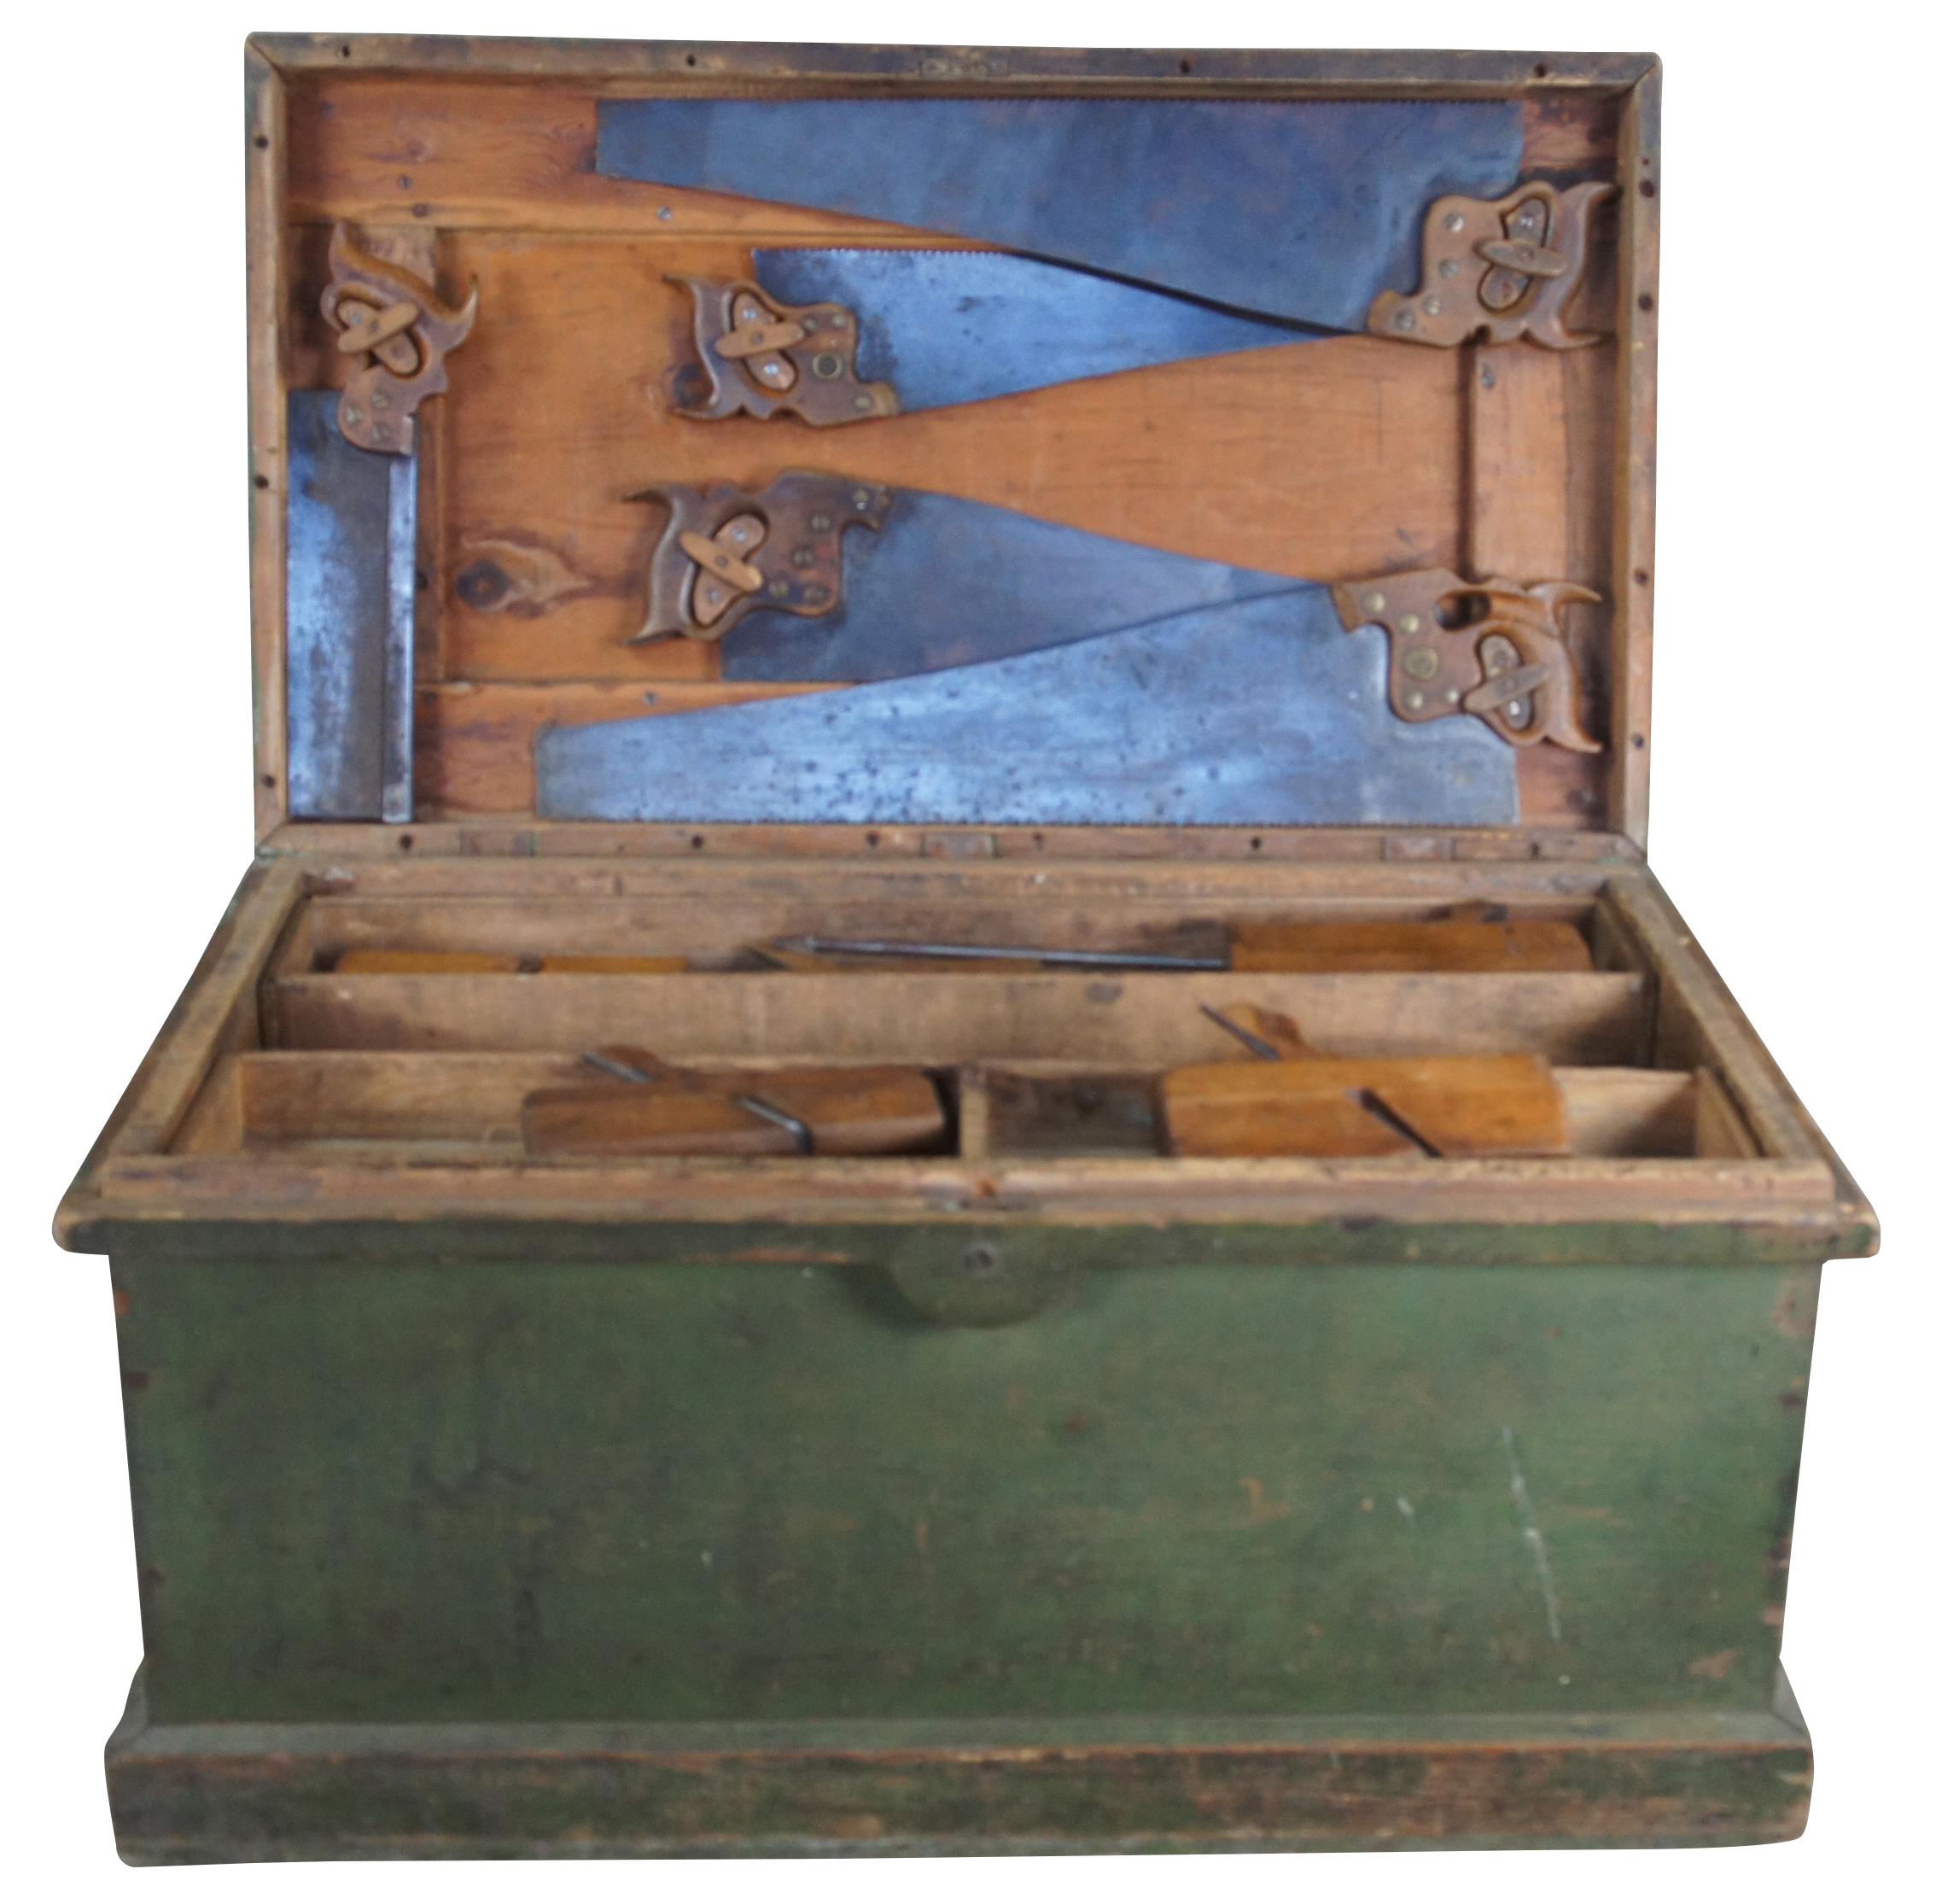 An exceptional and rare antique pine carpenters tool chest or trunk featuring five Disston hand saws, a bunch of planers and various extras. Marked along the upper lid, 